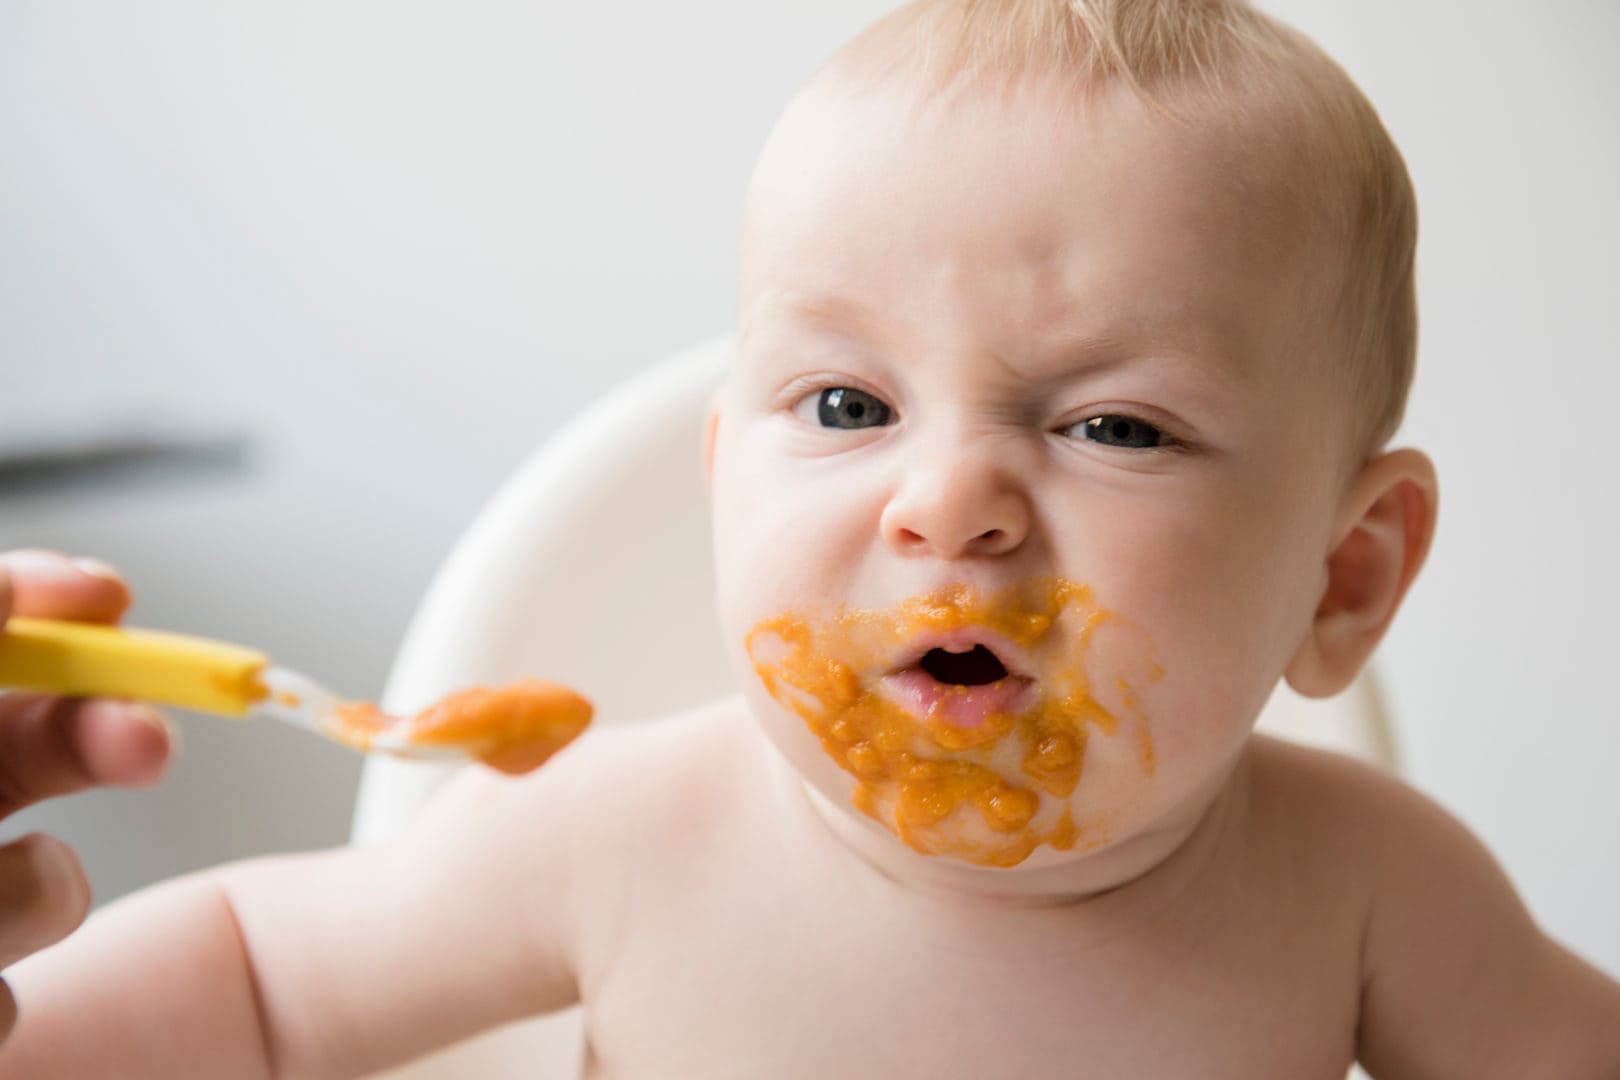 95 percent of baby food contains toxic heavy metals: What parents should know